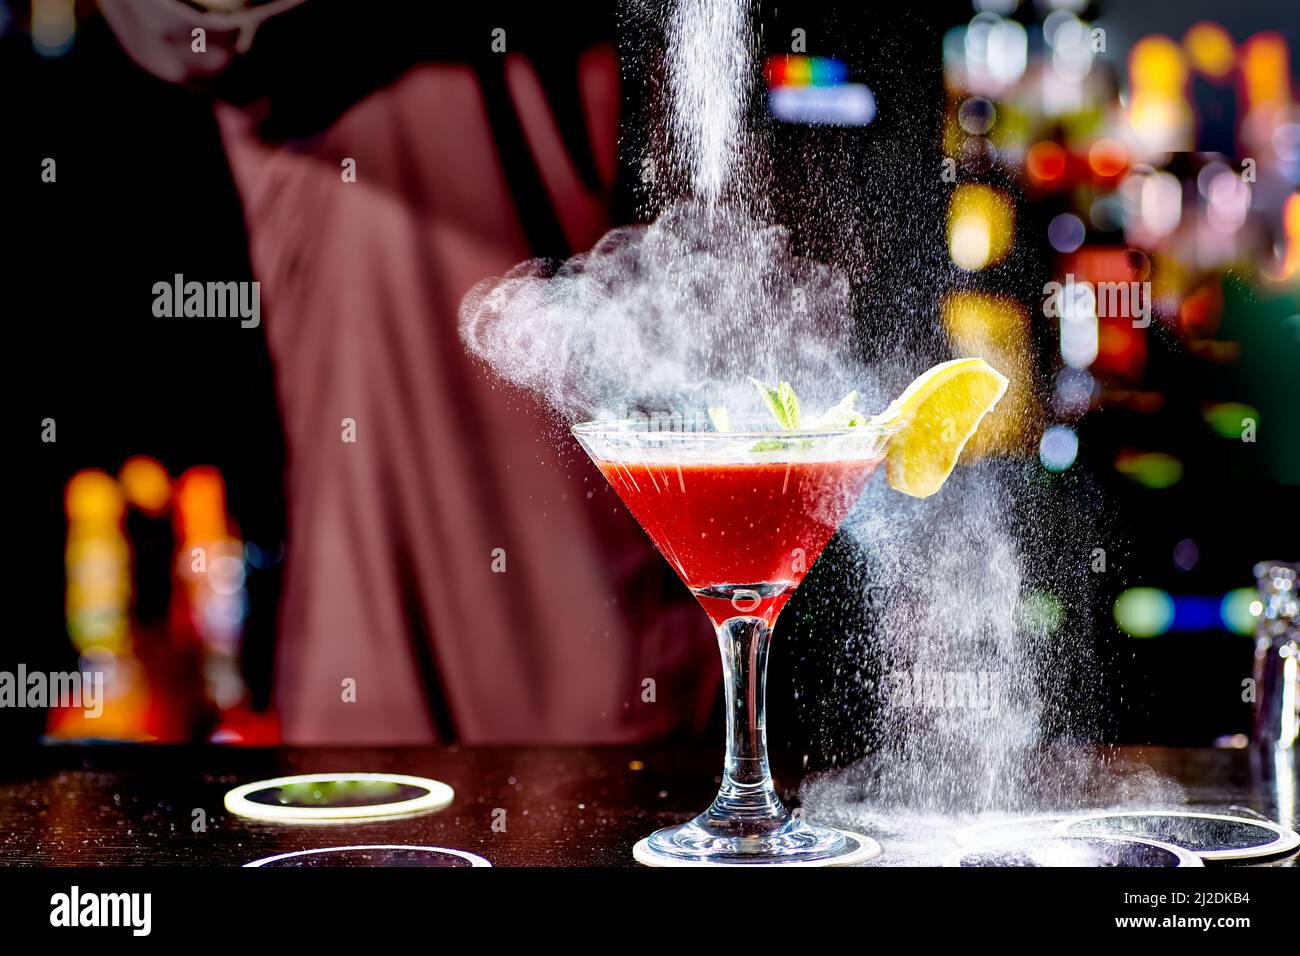 Red cocktail similar to a Margarita covered with powdered sugar is on the bar. Stock Photo